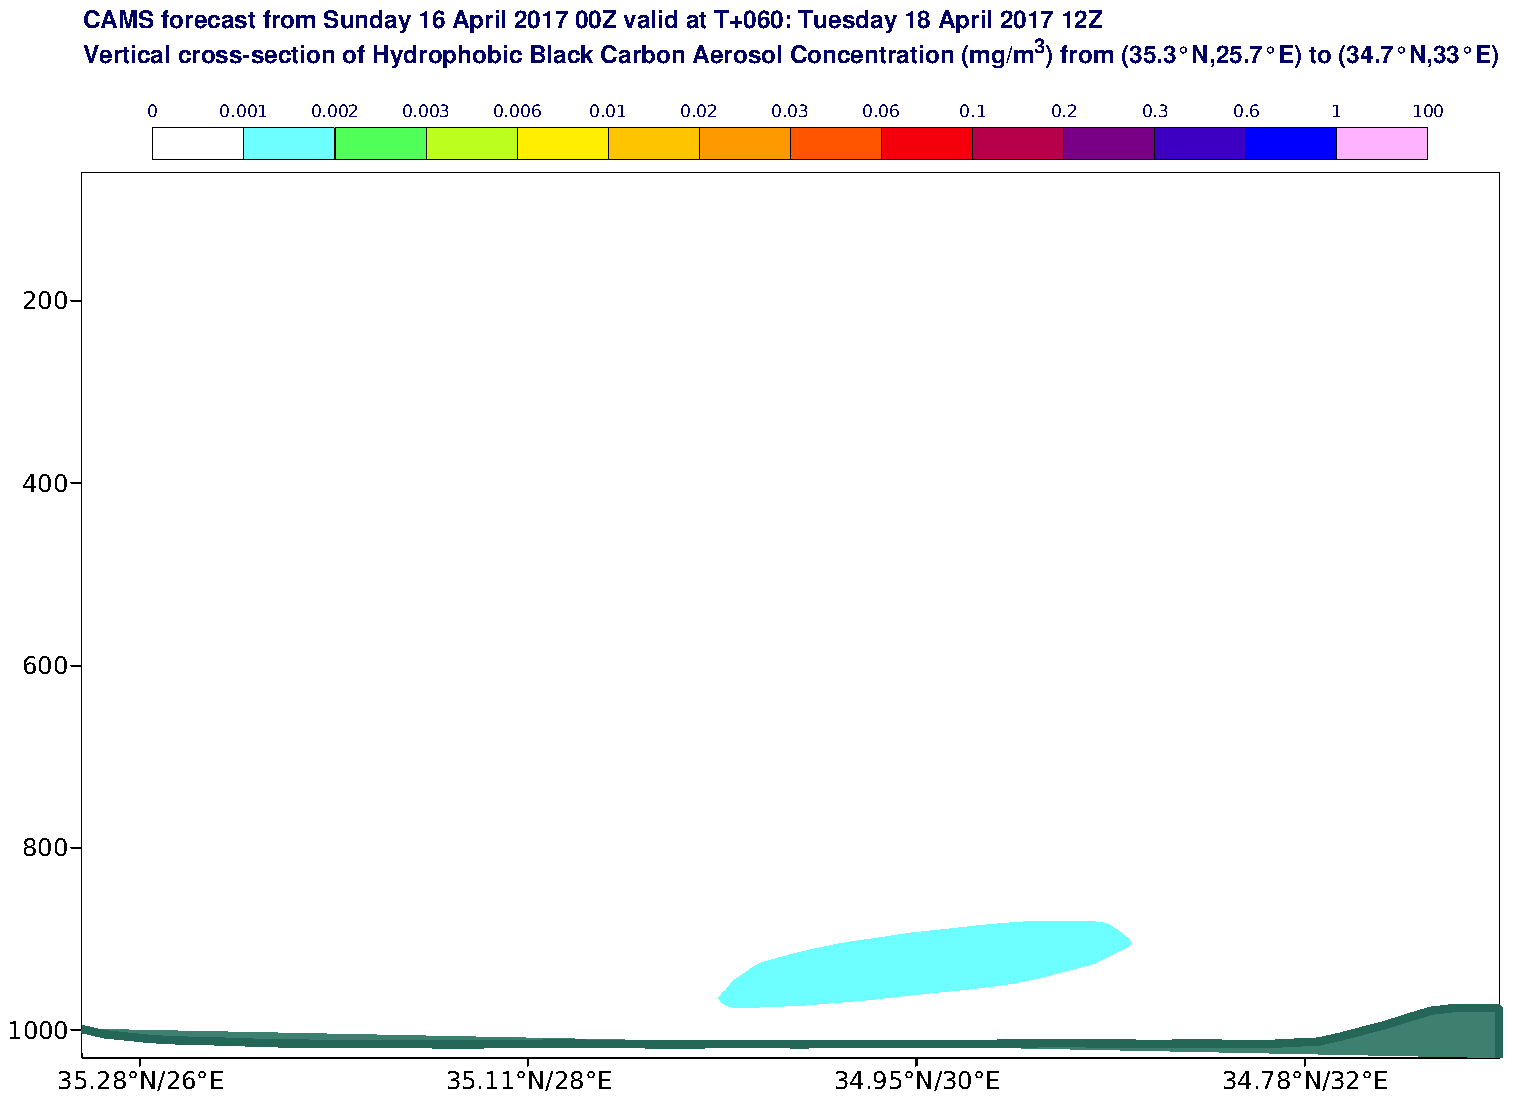 Vertical cross-section of Hydrophobic Black Carbon Aerosol Concentration (mg/m3) valid at T60 - 2017-04-18 12:00